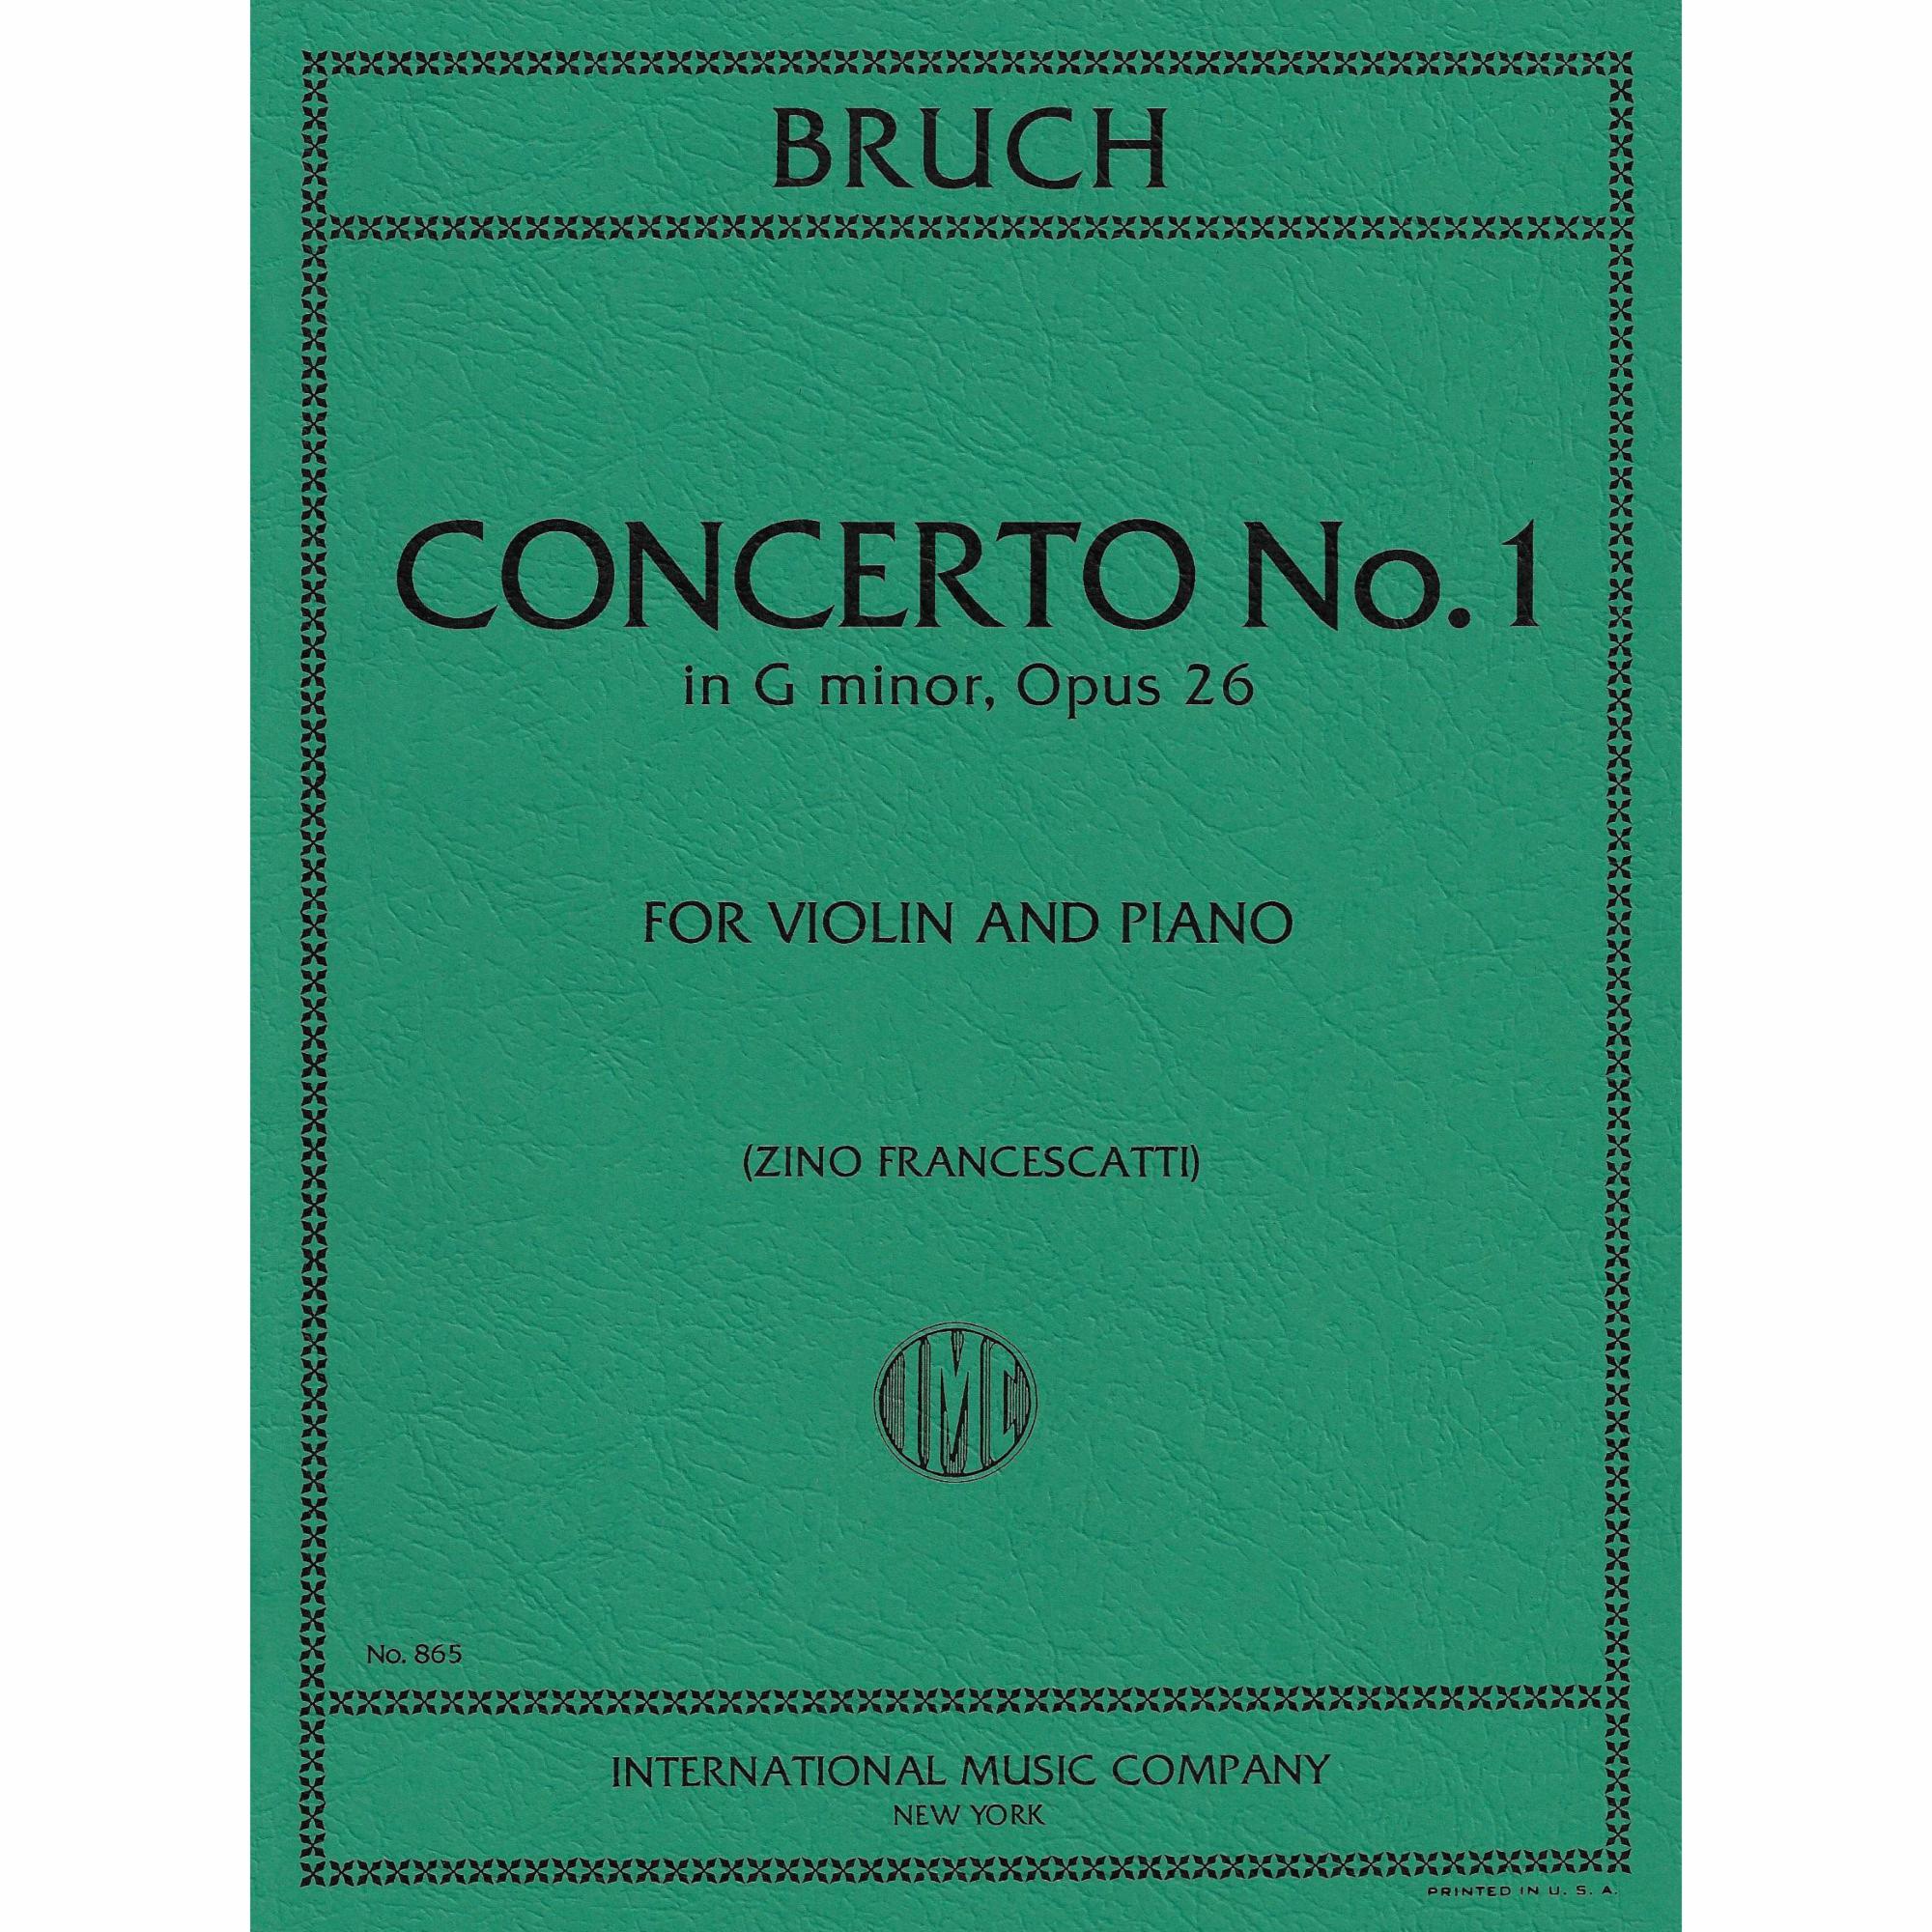 Bruch -- Concerto No. 1 in G Minor, Op. 26 for Violin and Piano